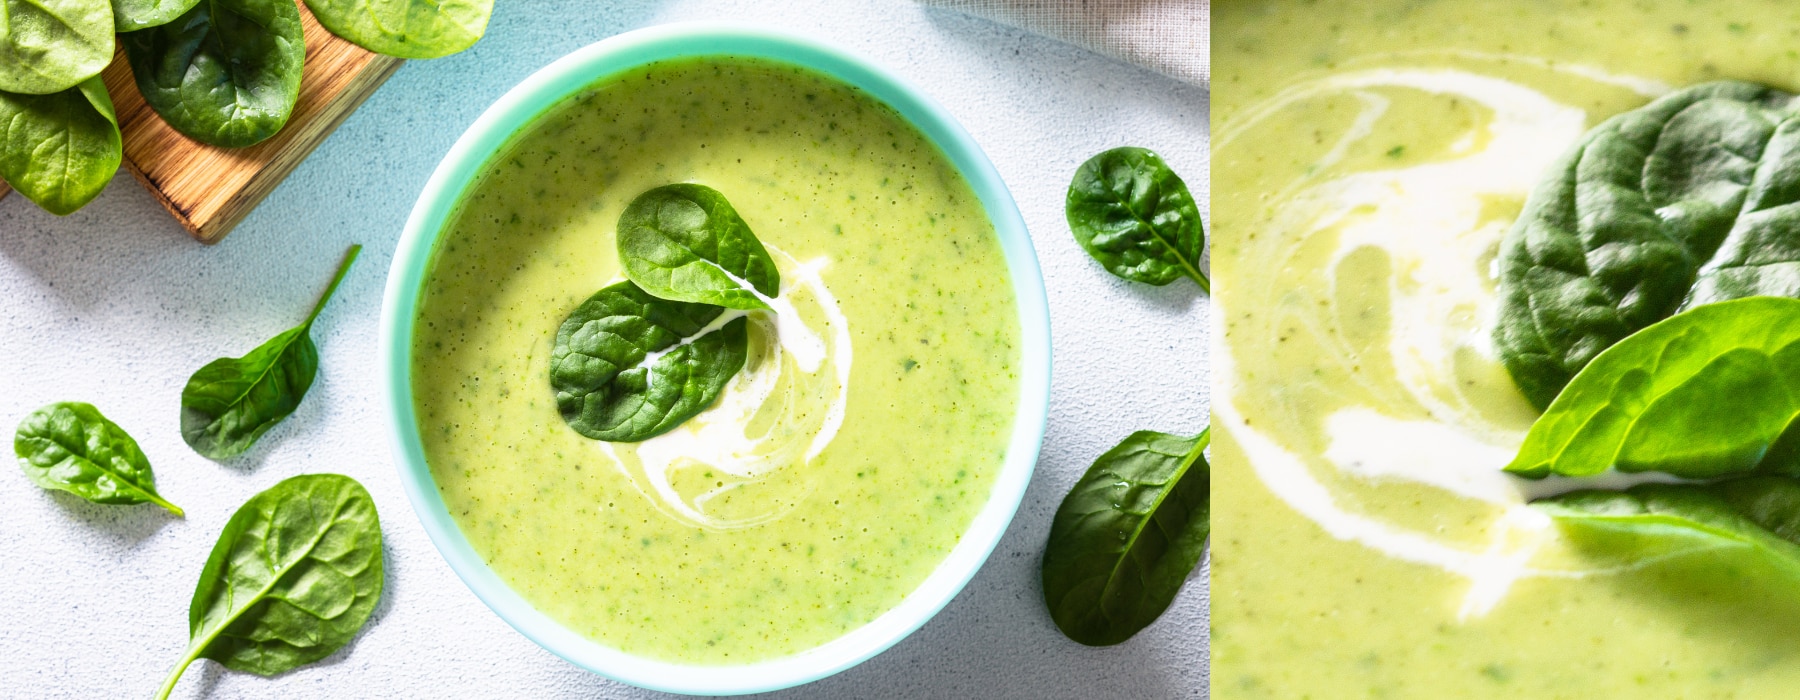 Make This Polonchay Soup That Tastes Too Good to Be Healthy